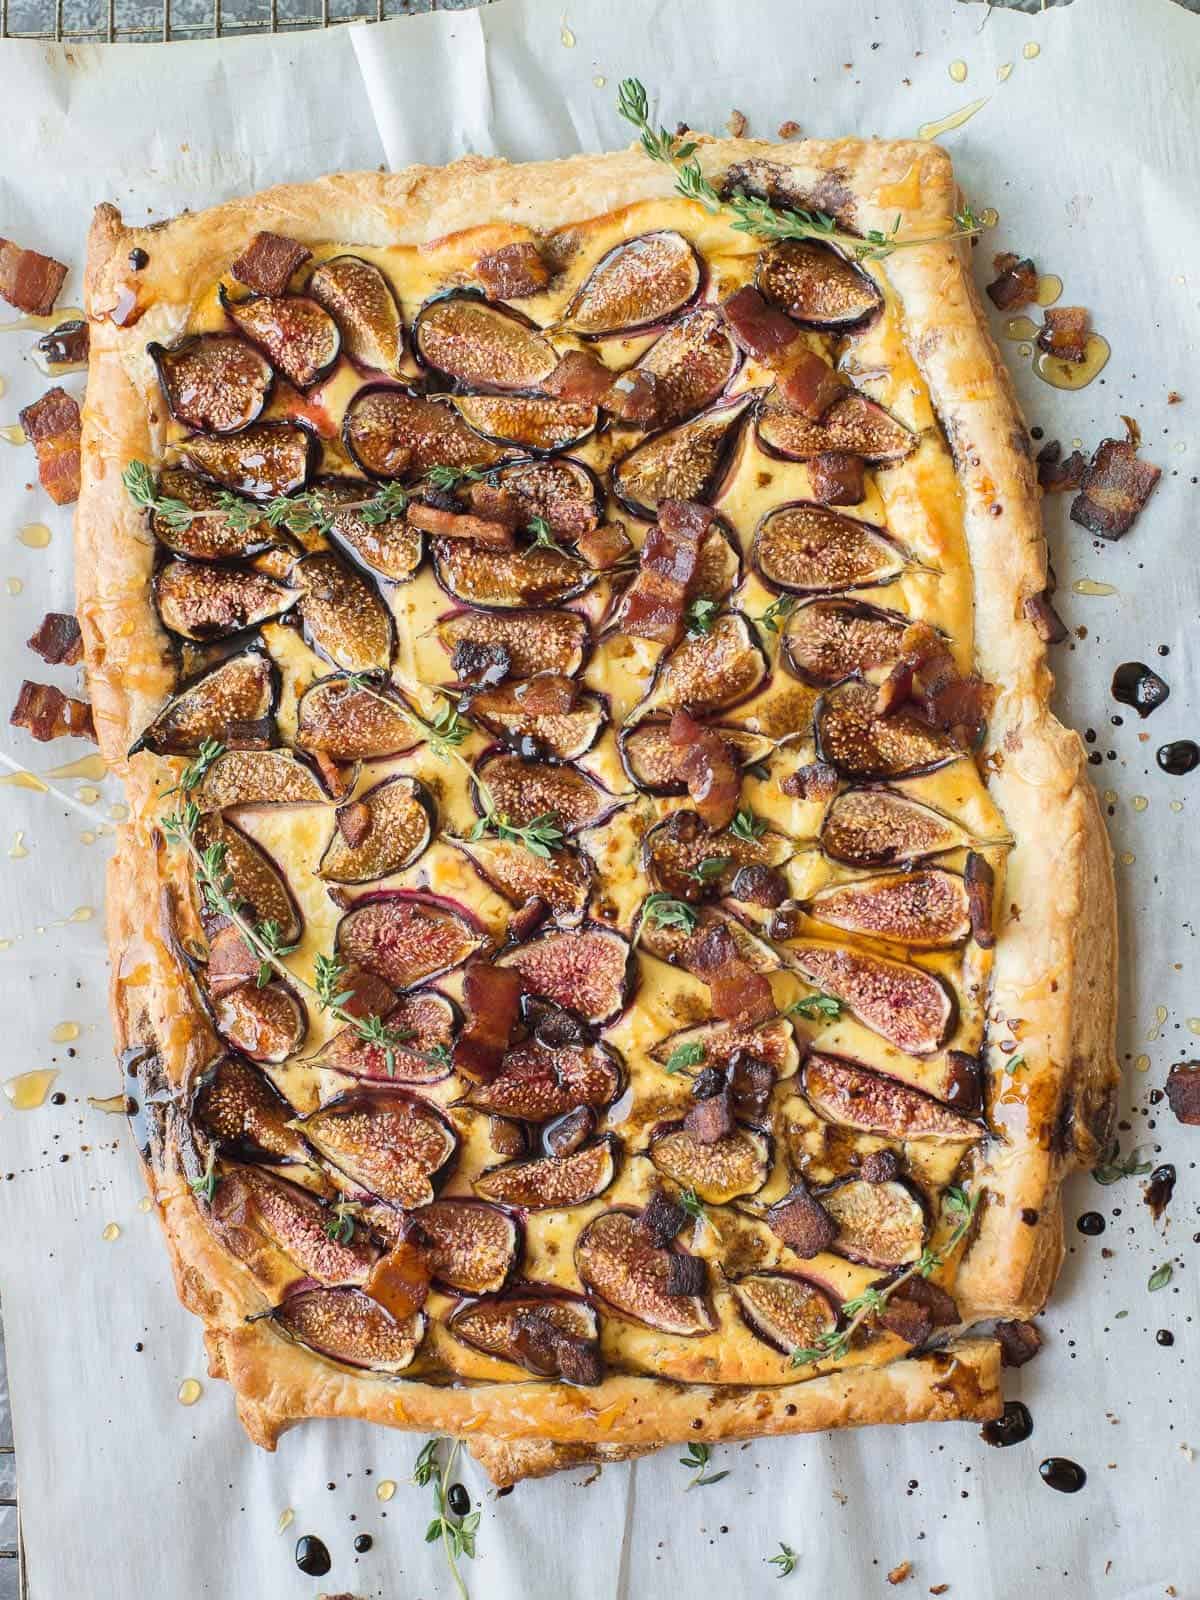 fig tart with crispy bacon and a balsamic glaze drizzled on top